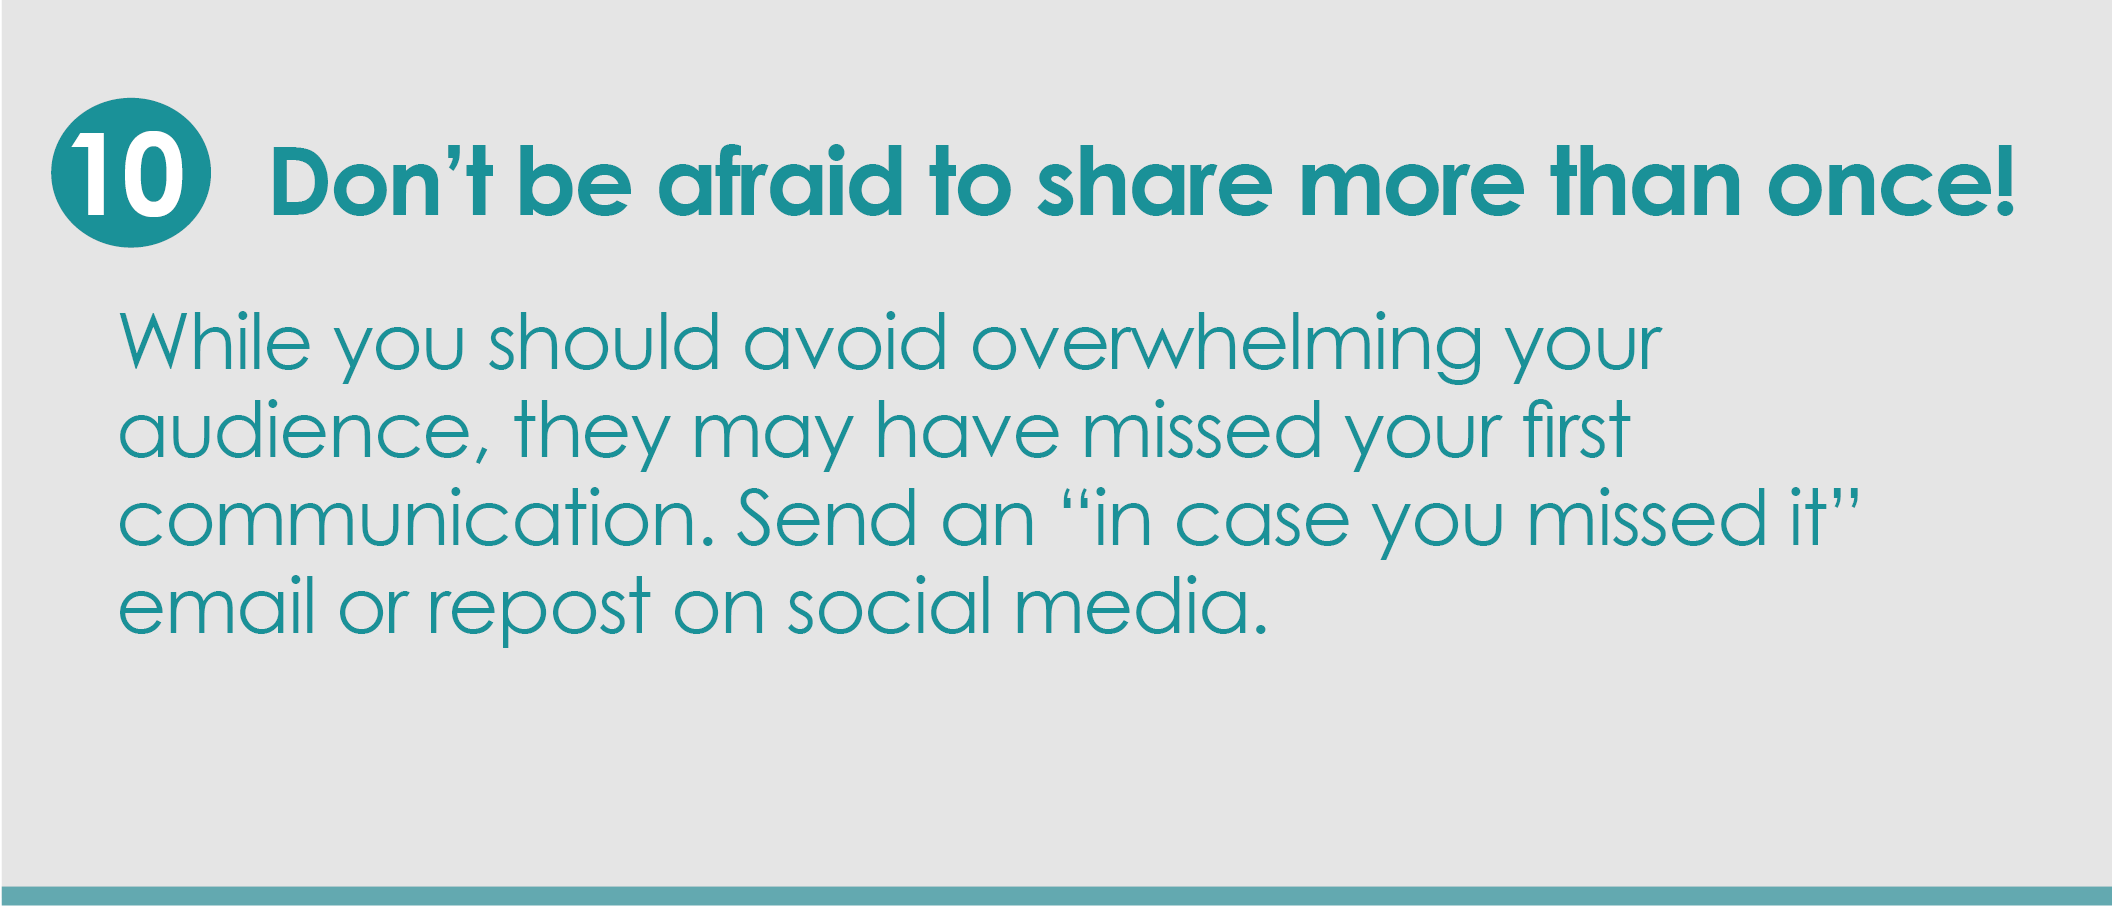 Step 10: Don't be afraid to share more than once! While you should never overwhelm your audience with messages, they may have missed your first communication.  Send an “in case you missed it” email or repost on social media.